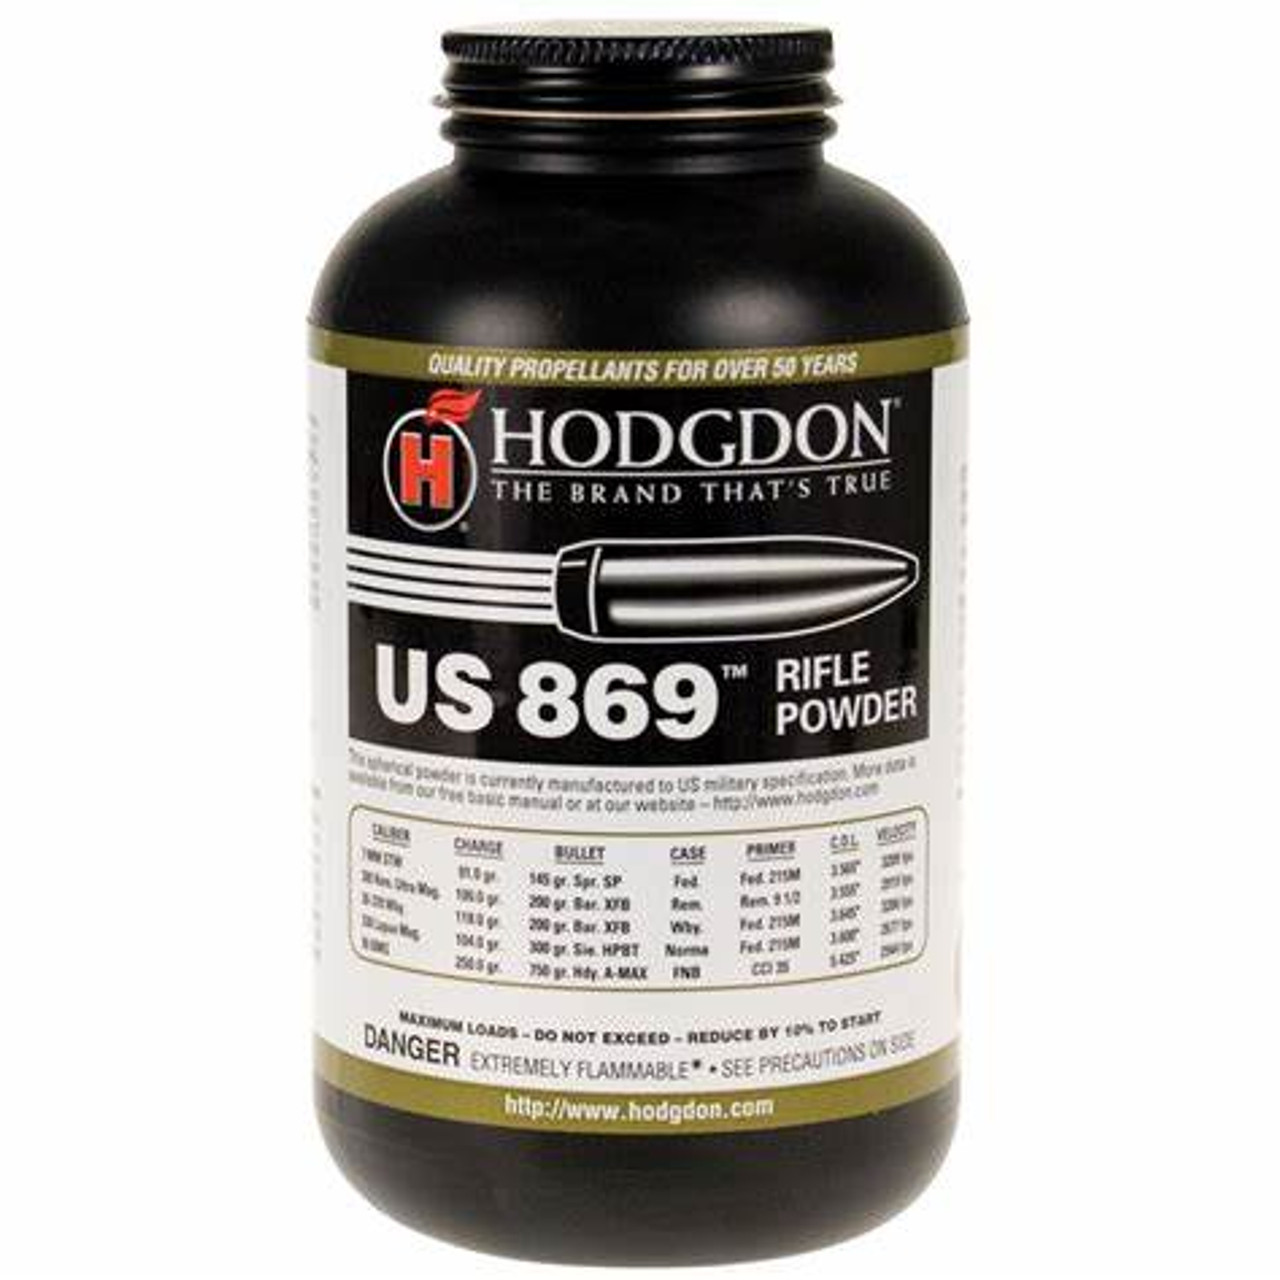 Hodgdon US 869 Spherical Rifle Powder is a prime example of quality smokeless products manufactured by a company with 60-plus years in the business of reloading. As a .50 BMG propellant, this powder offers incredible advantages compared to the competition for a large number of rifle applications. This spherical powder is used for rifle cartridges and is ideal for overbore, heavy bullets.

The powder is dense, making it possible for you to use a volume of powder that produces outstanding velocities in .300 Remington Ultra Magnum, 7mm Remington Ultra Magnum, and .30-378 Weather Magnum cartridges, among others.